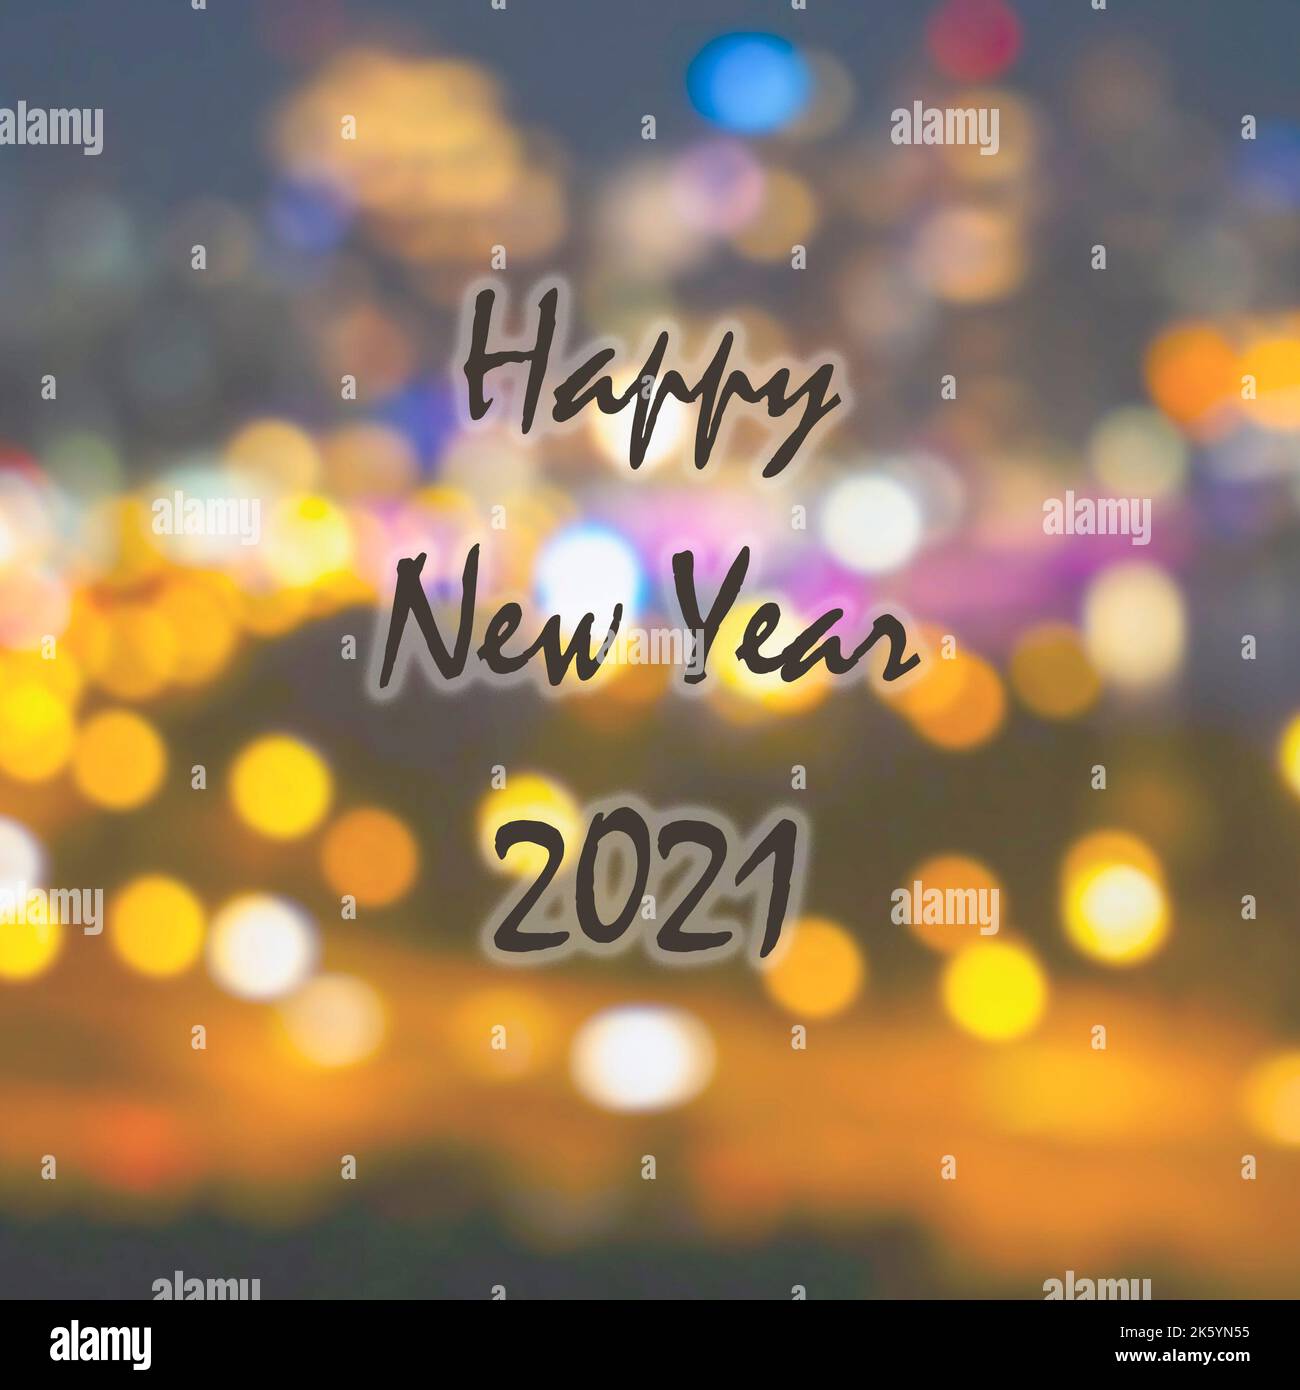 Happy New Year 2021 greetings on abstract defocused light bokeh for background Stock Photo